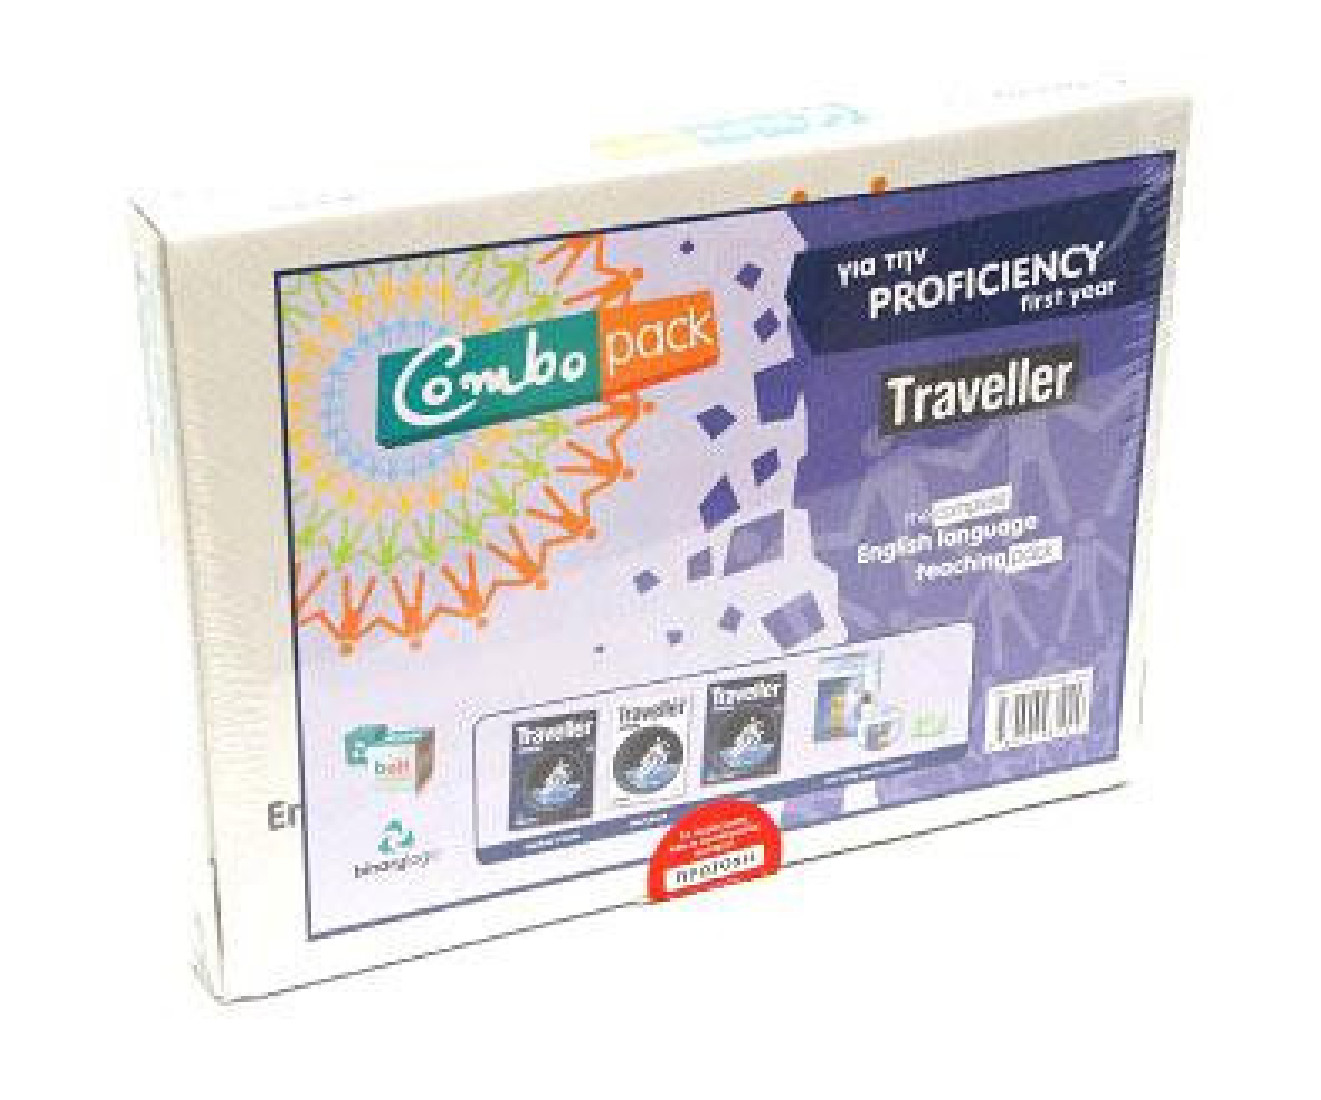 COMBO PACK PROFICIENCY 1st YEAR (TRAVELLER)